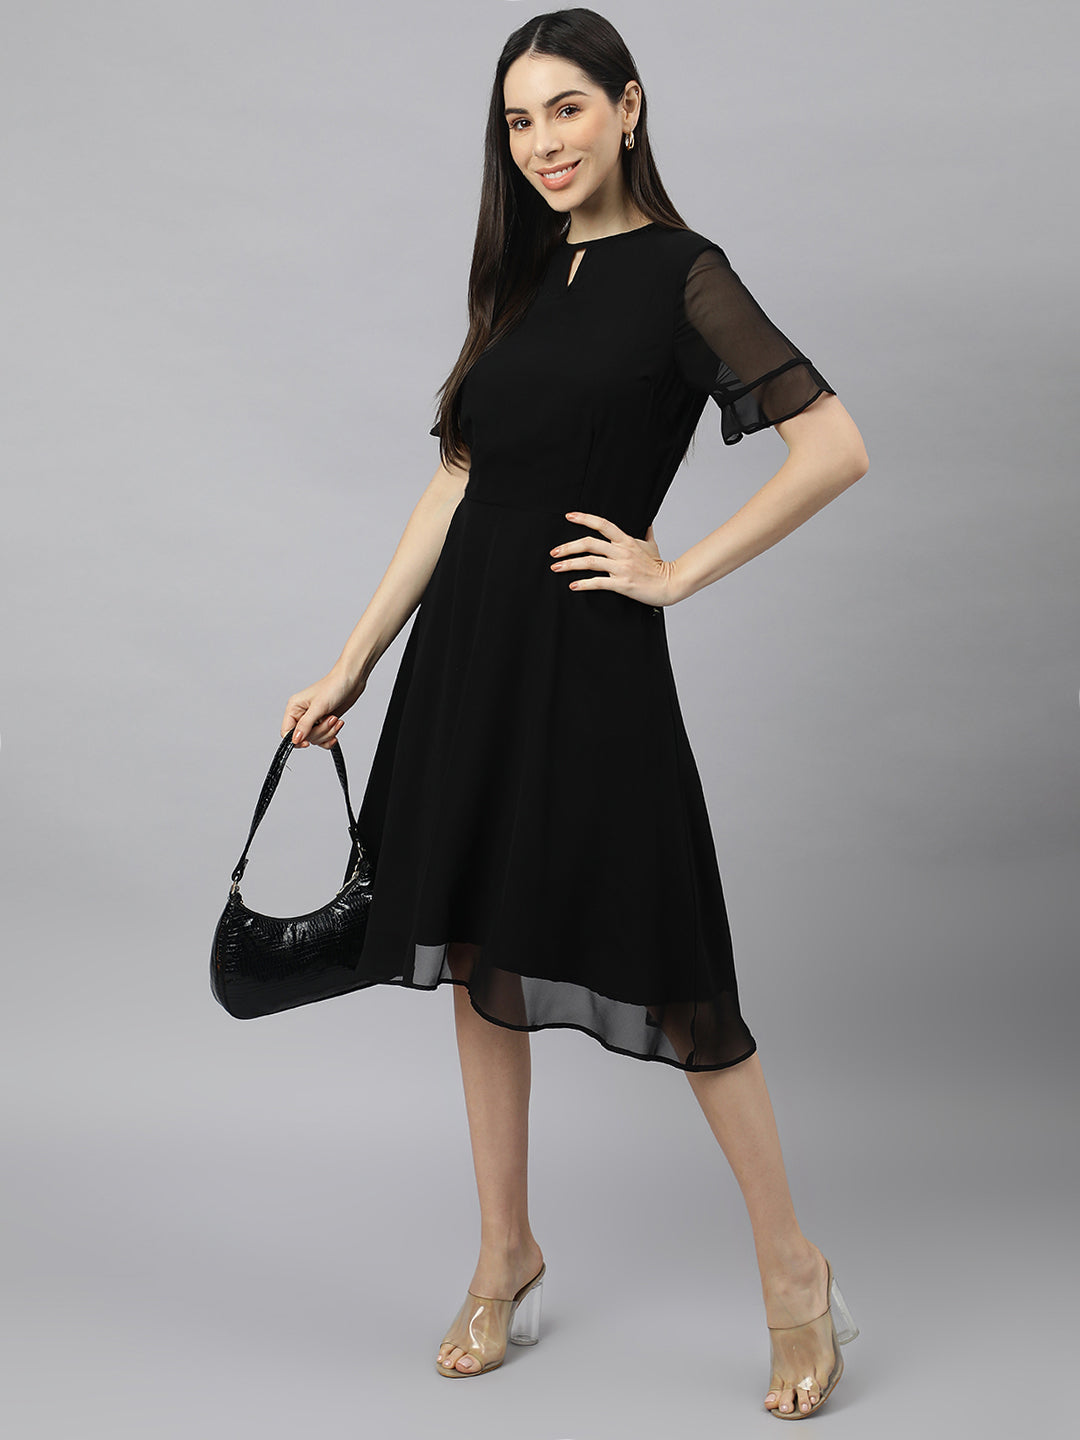 Plain Black One Piece Dress, 3/4th Sleeves, Formal Wear at Rs 1695/piece in  New Delhi